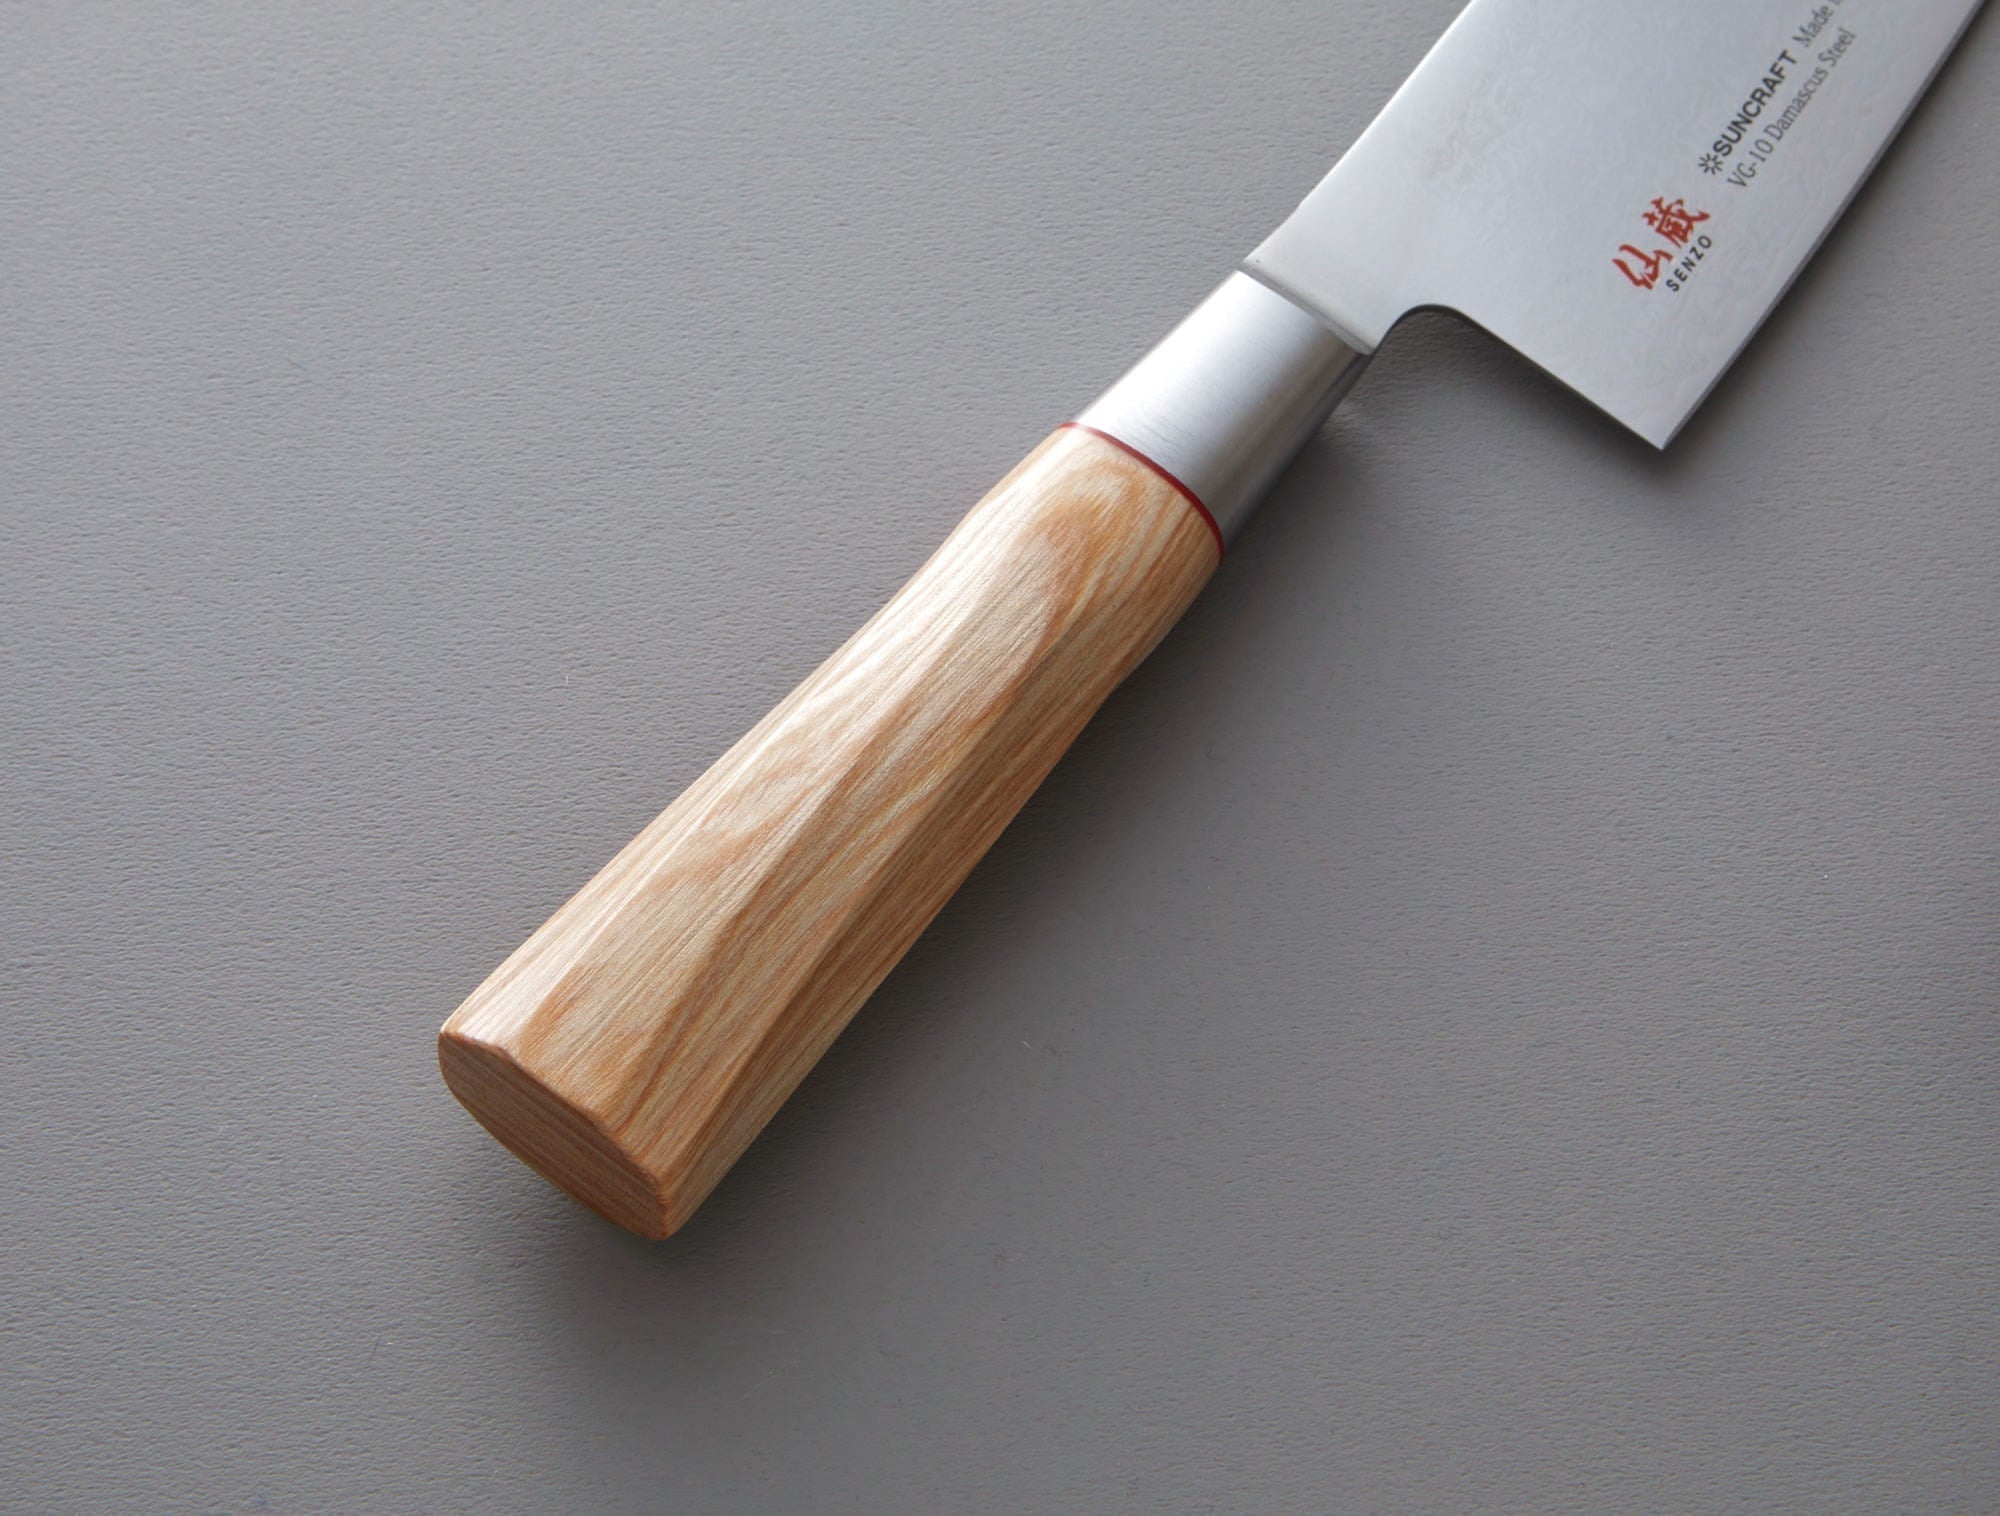 Senzo To 05 Cook Knife, 20 Cm